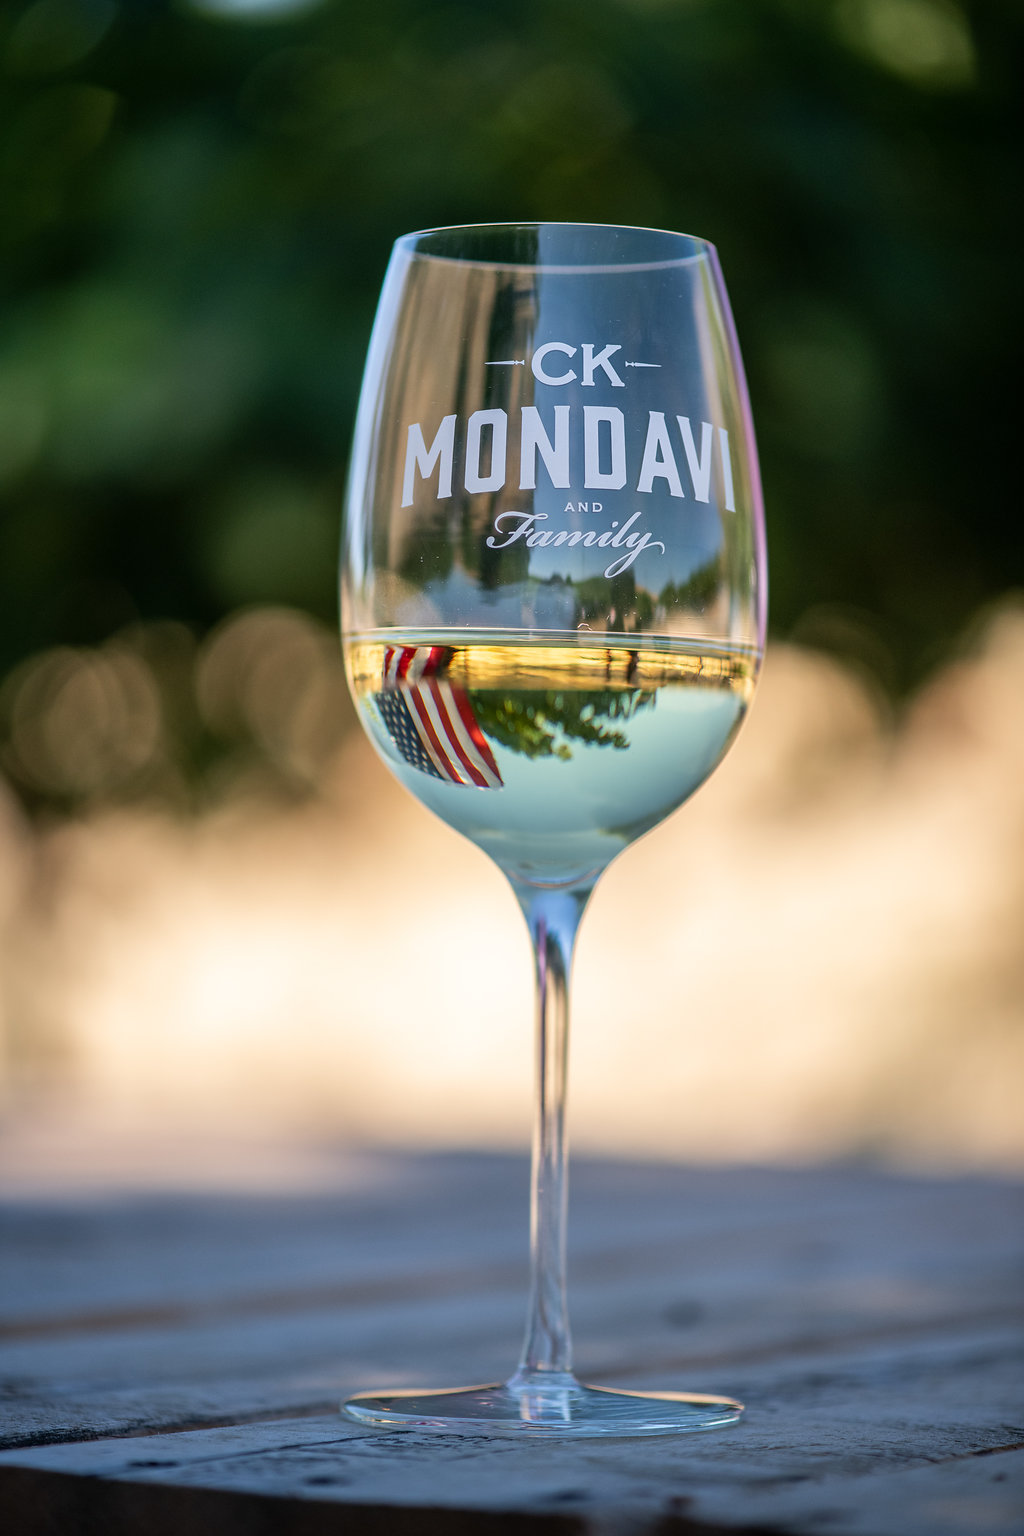 In honor of third generation co-proprietor Marc Mondavi’s 45th harvest with the winery, CK Mondavi and Family is giving back to organizations that support veterans and their families this fall.